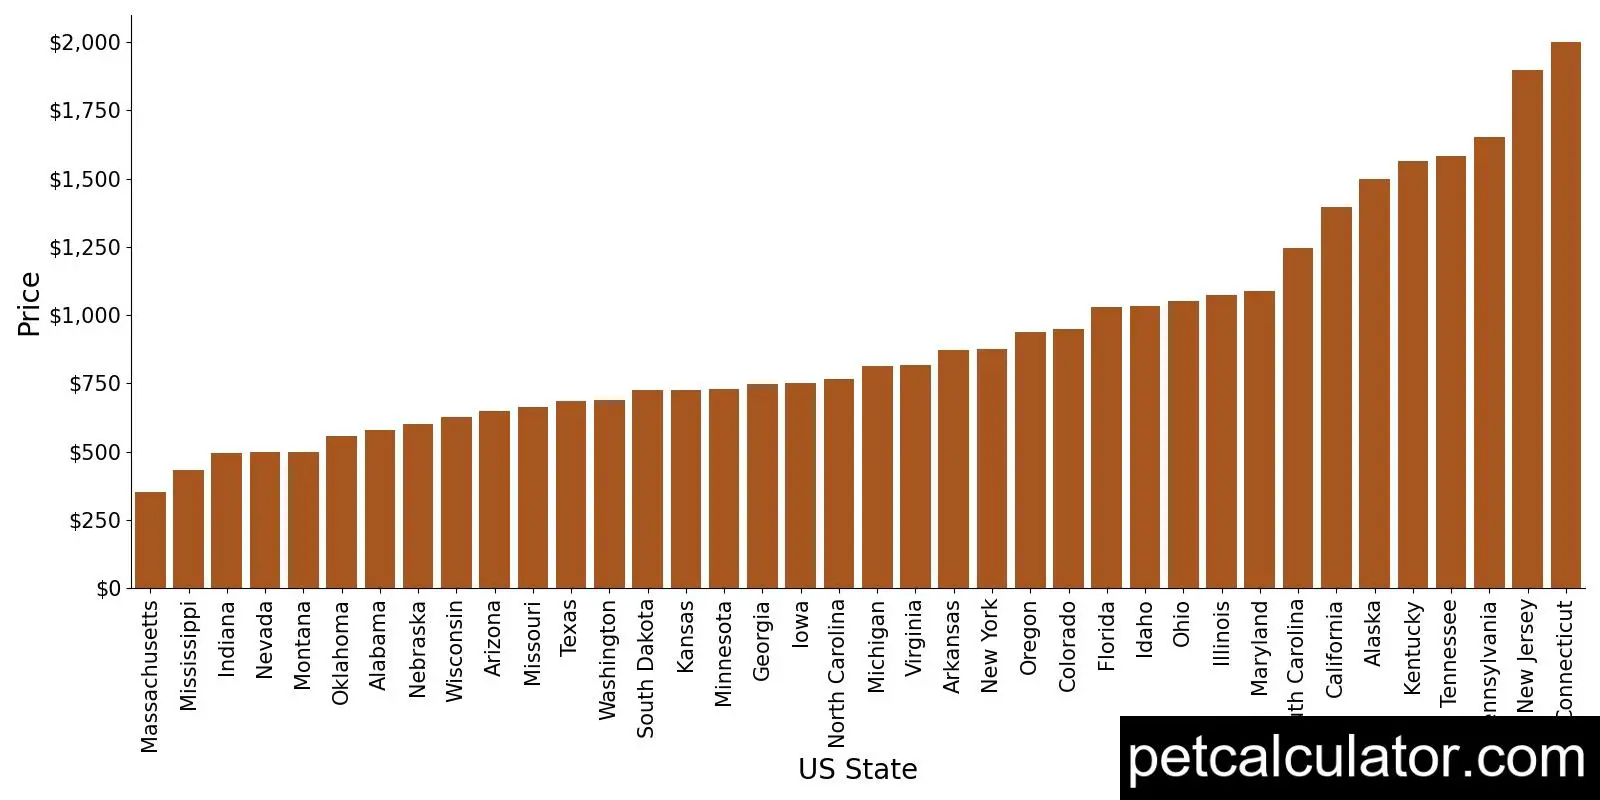 Price of Designer Breed Large by US State 